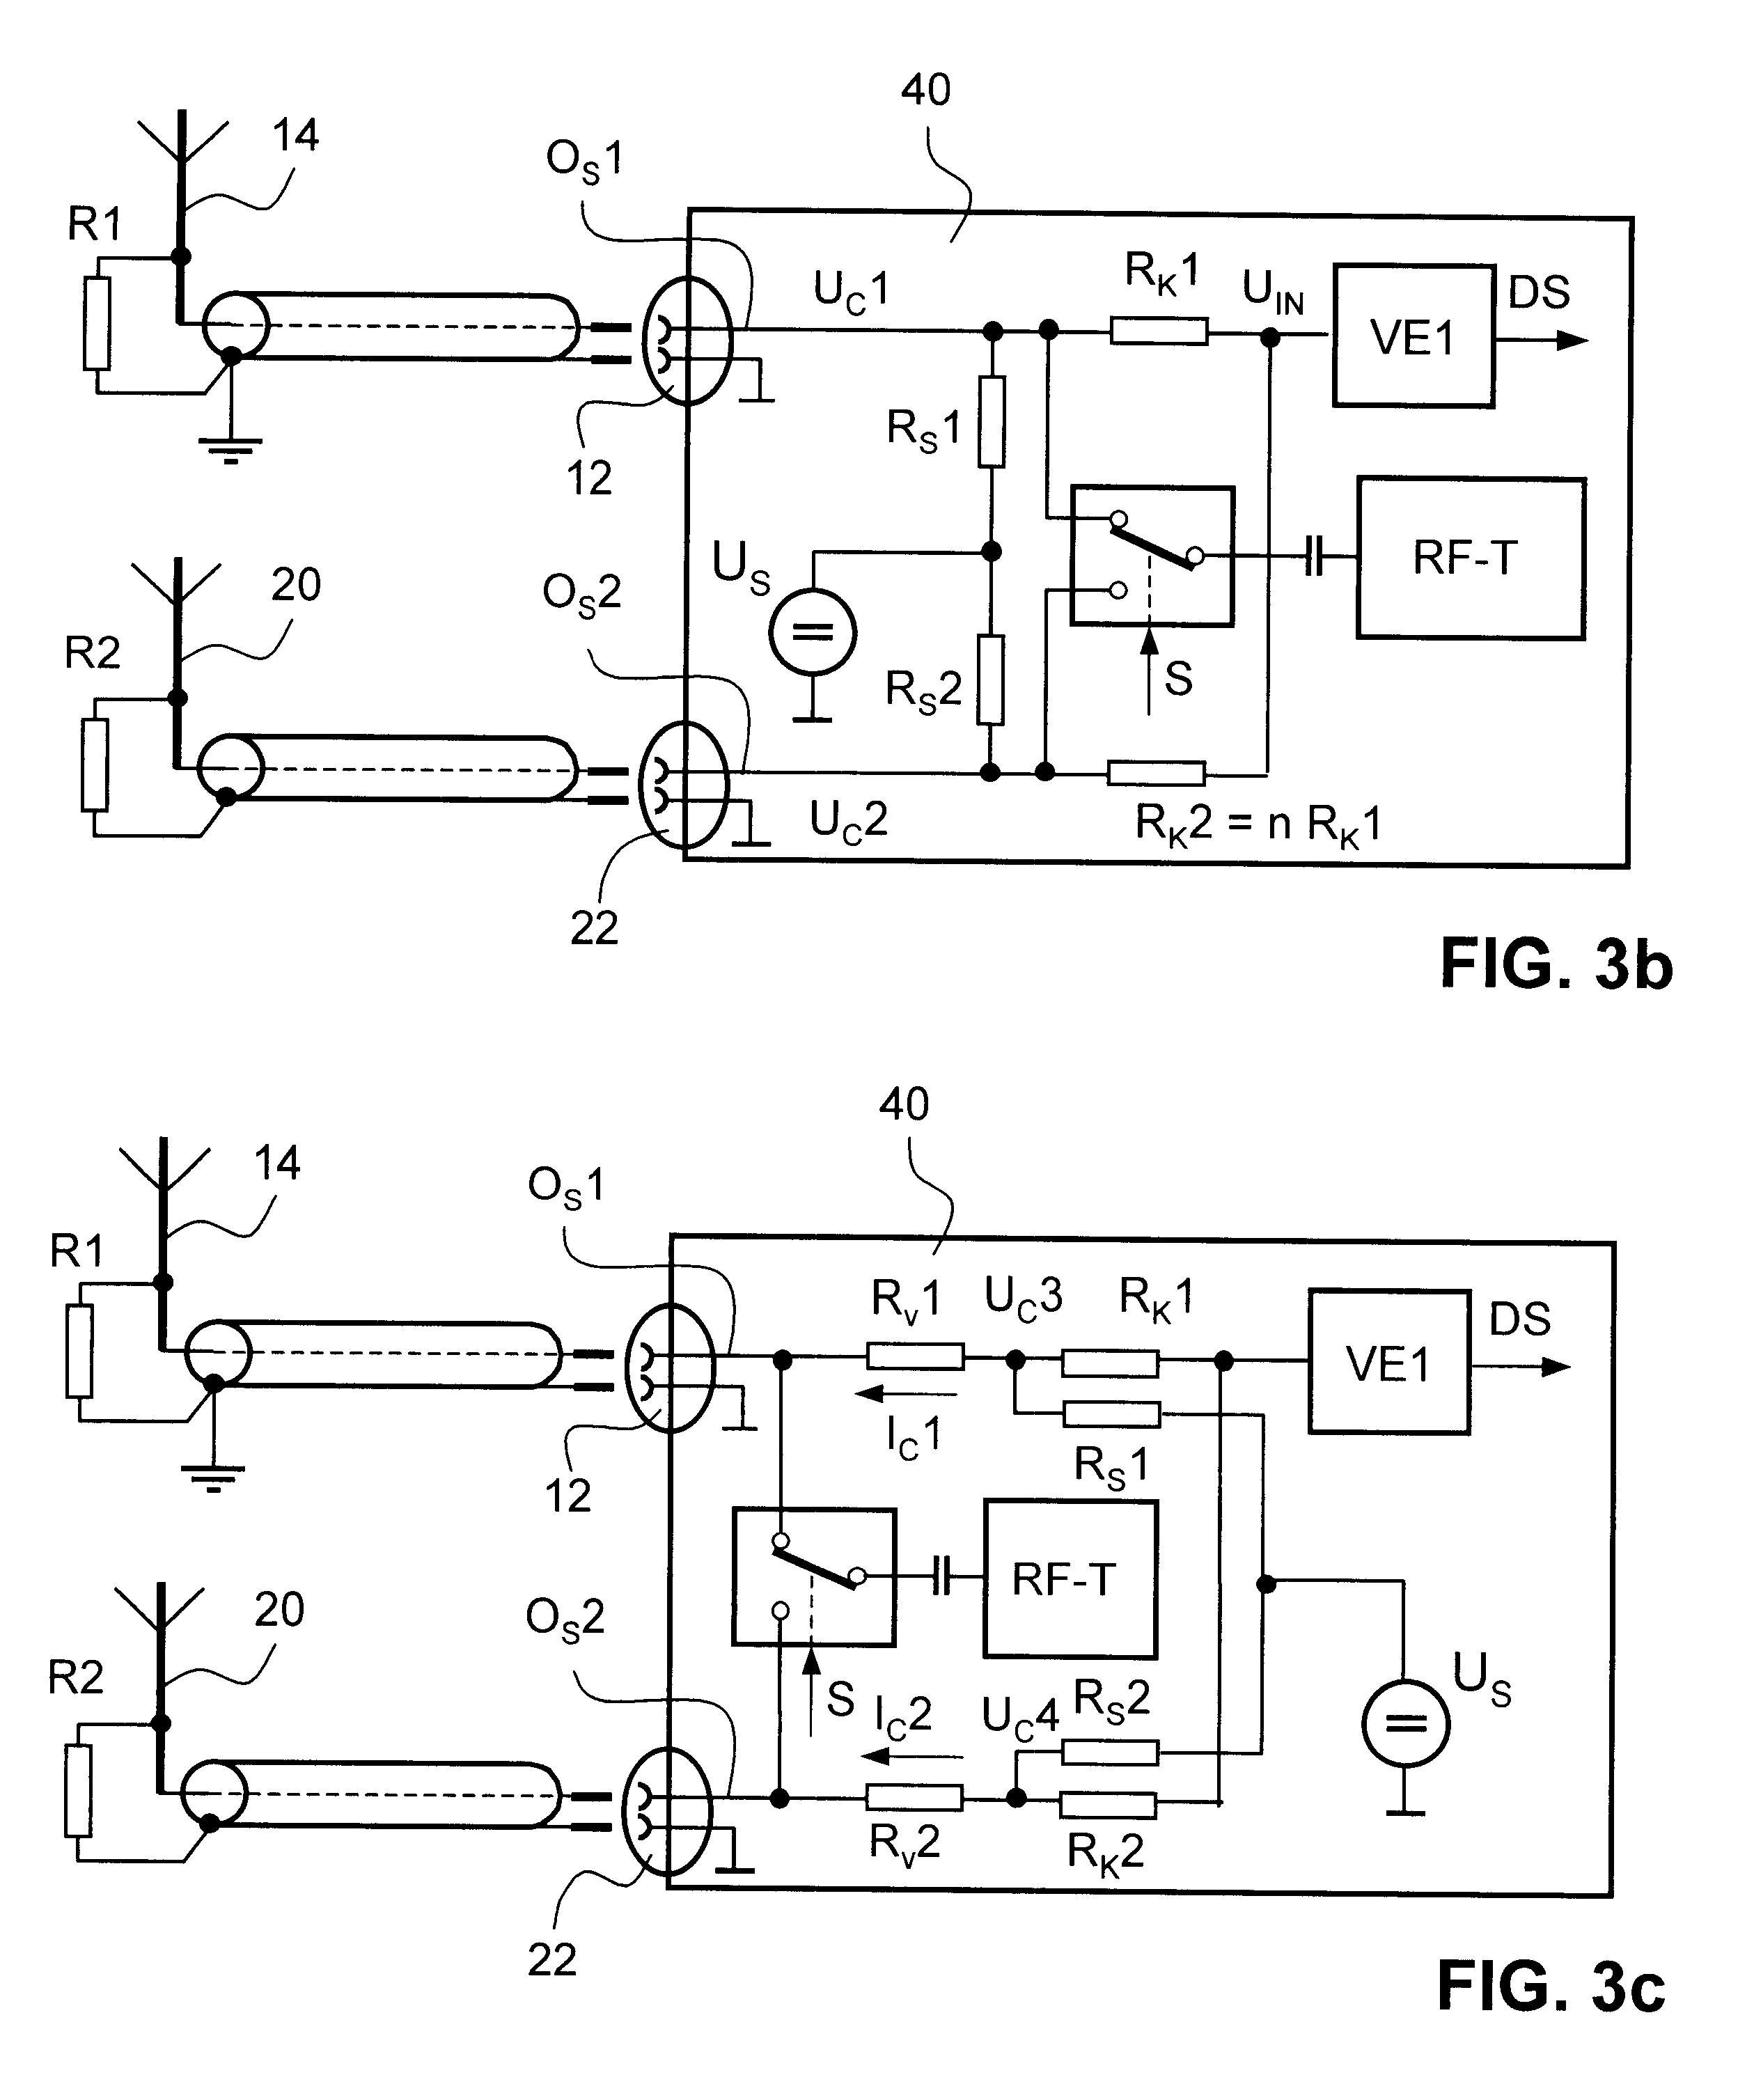 Circuit to test the working of at least one antenna